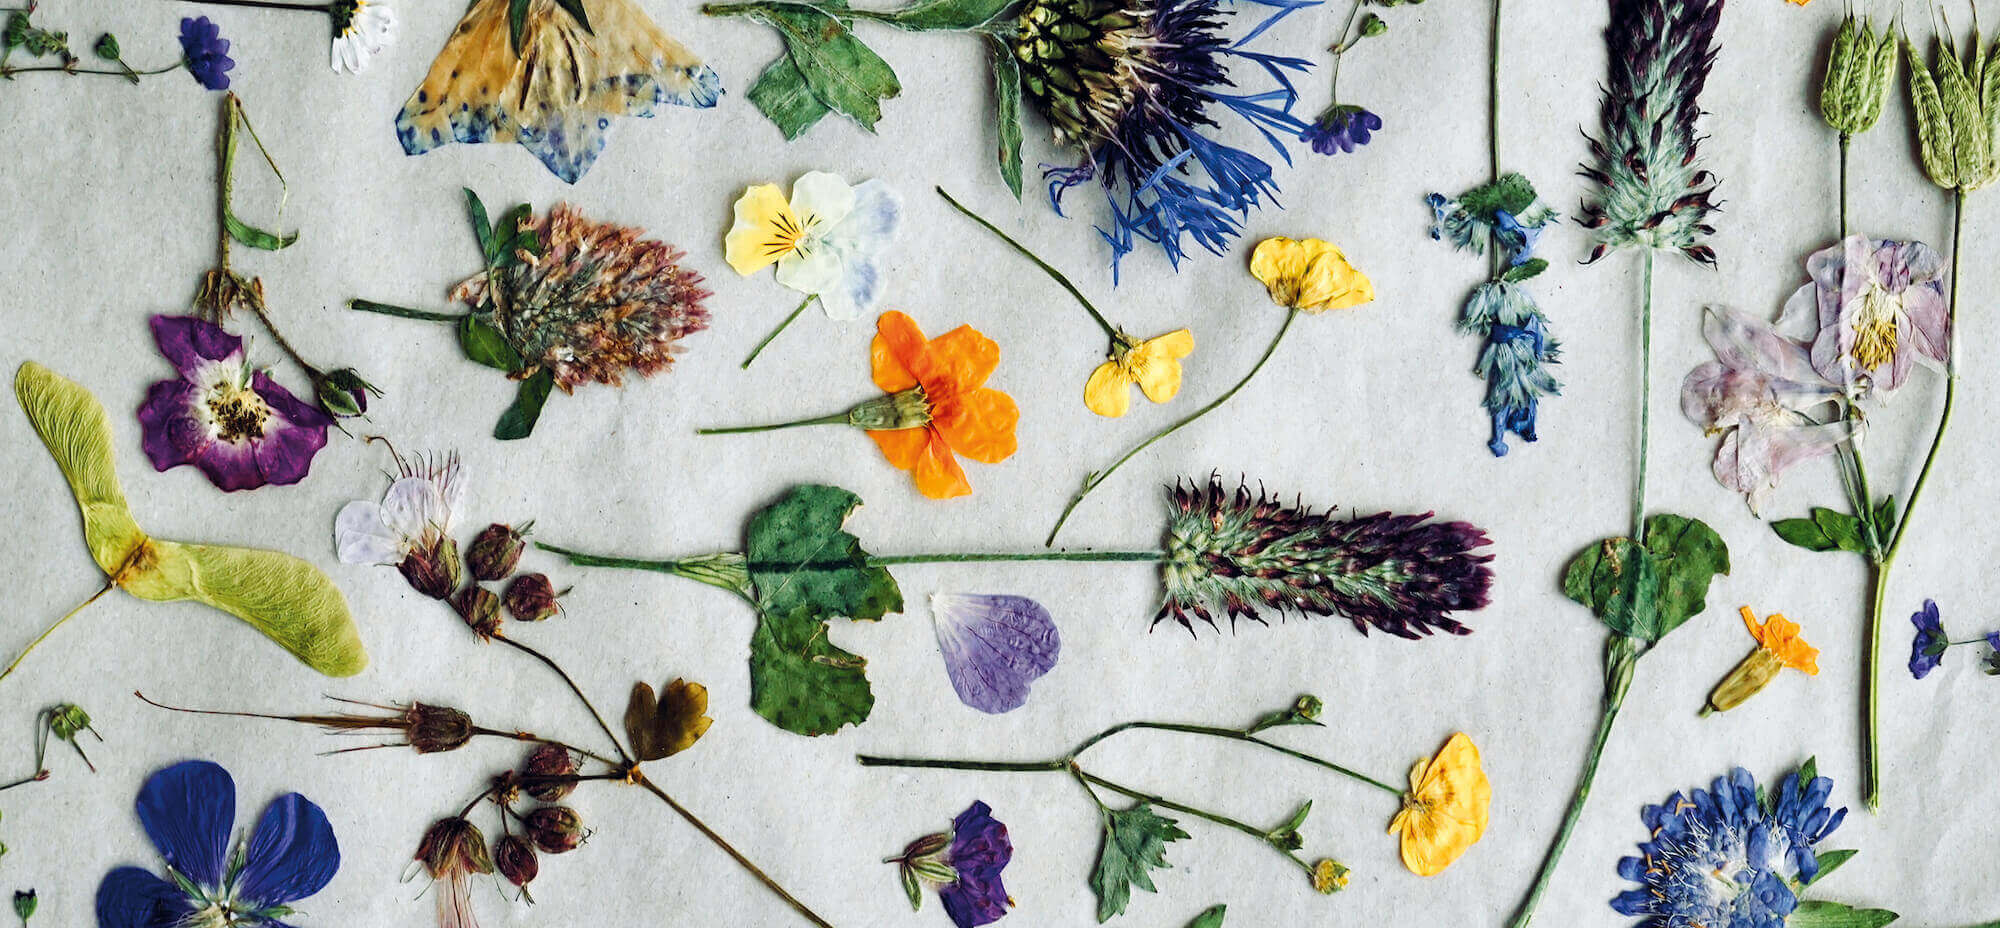 For Food & Love – A collection of last year's most beautiful pressed flowers